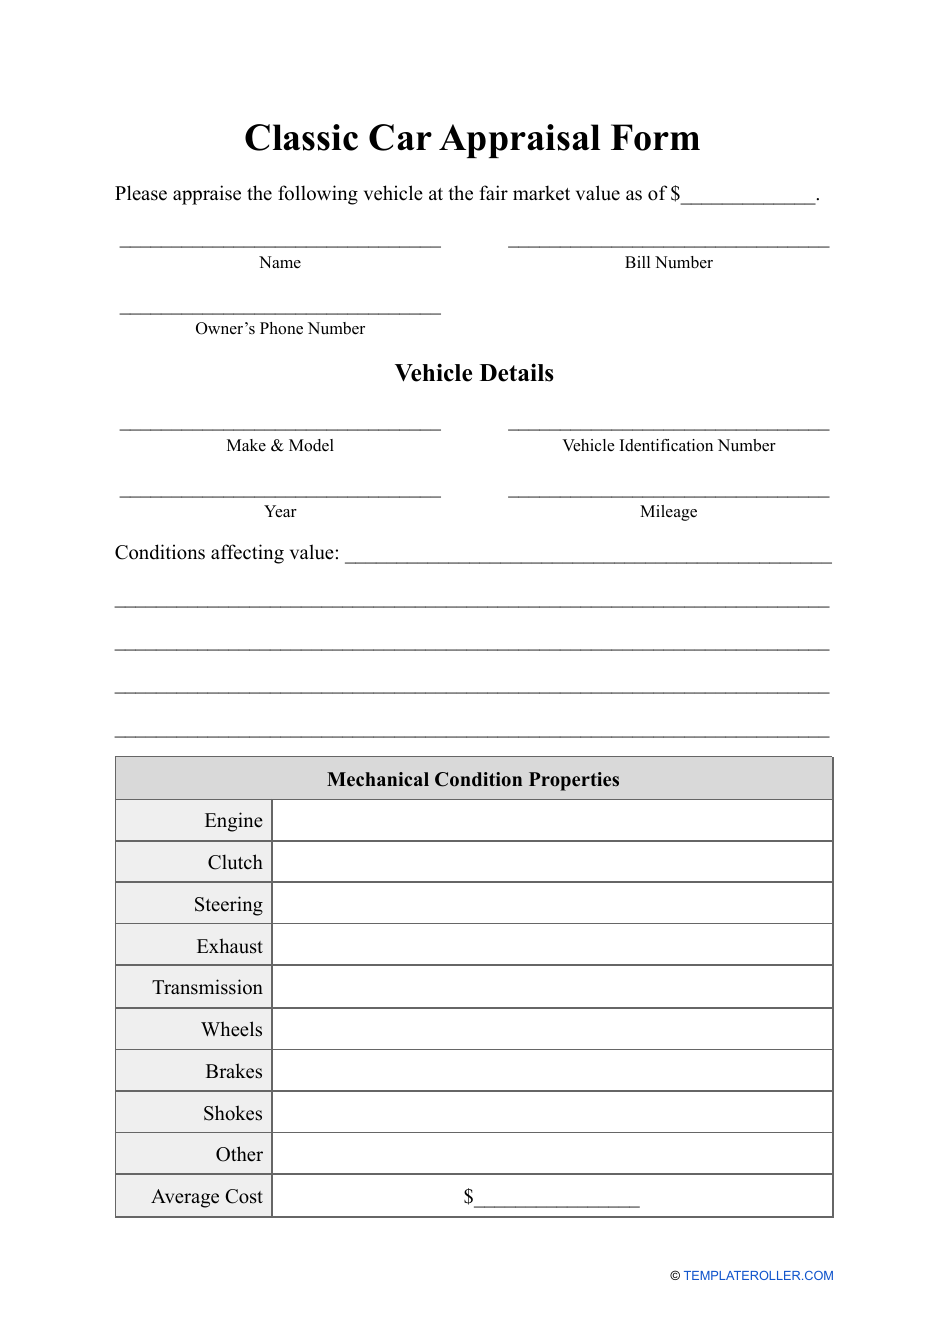 Classic Car Appraisal Form, Page 1